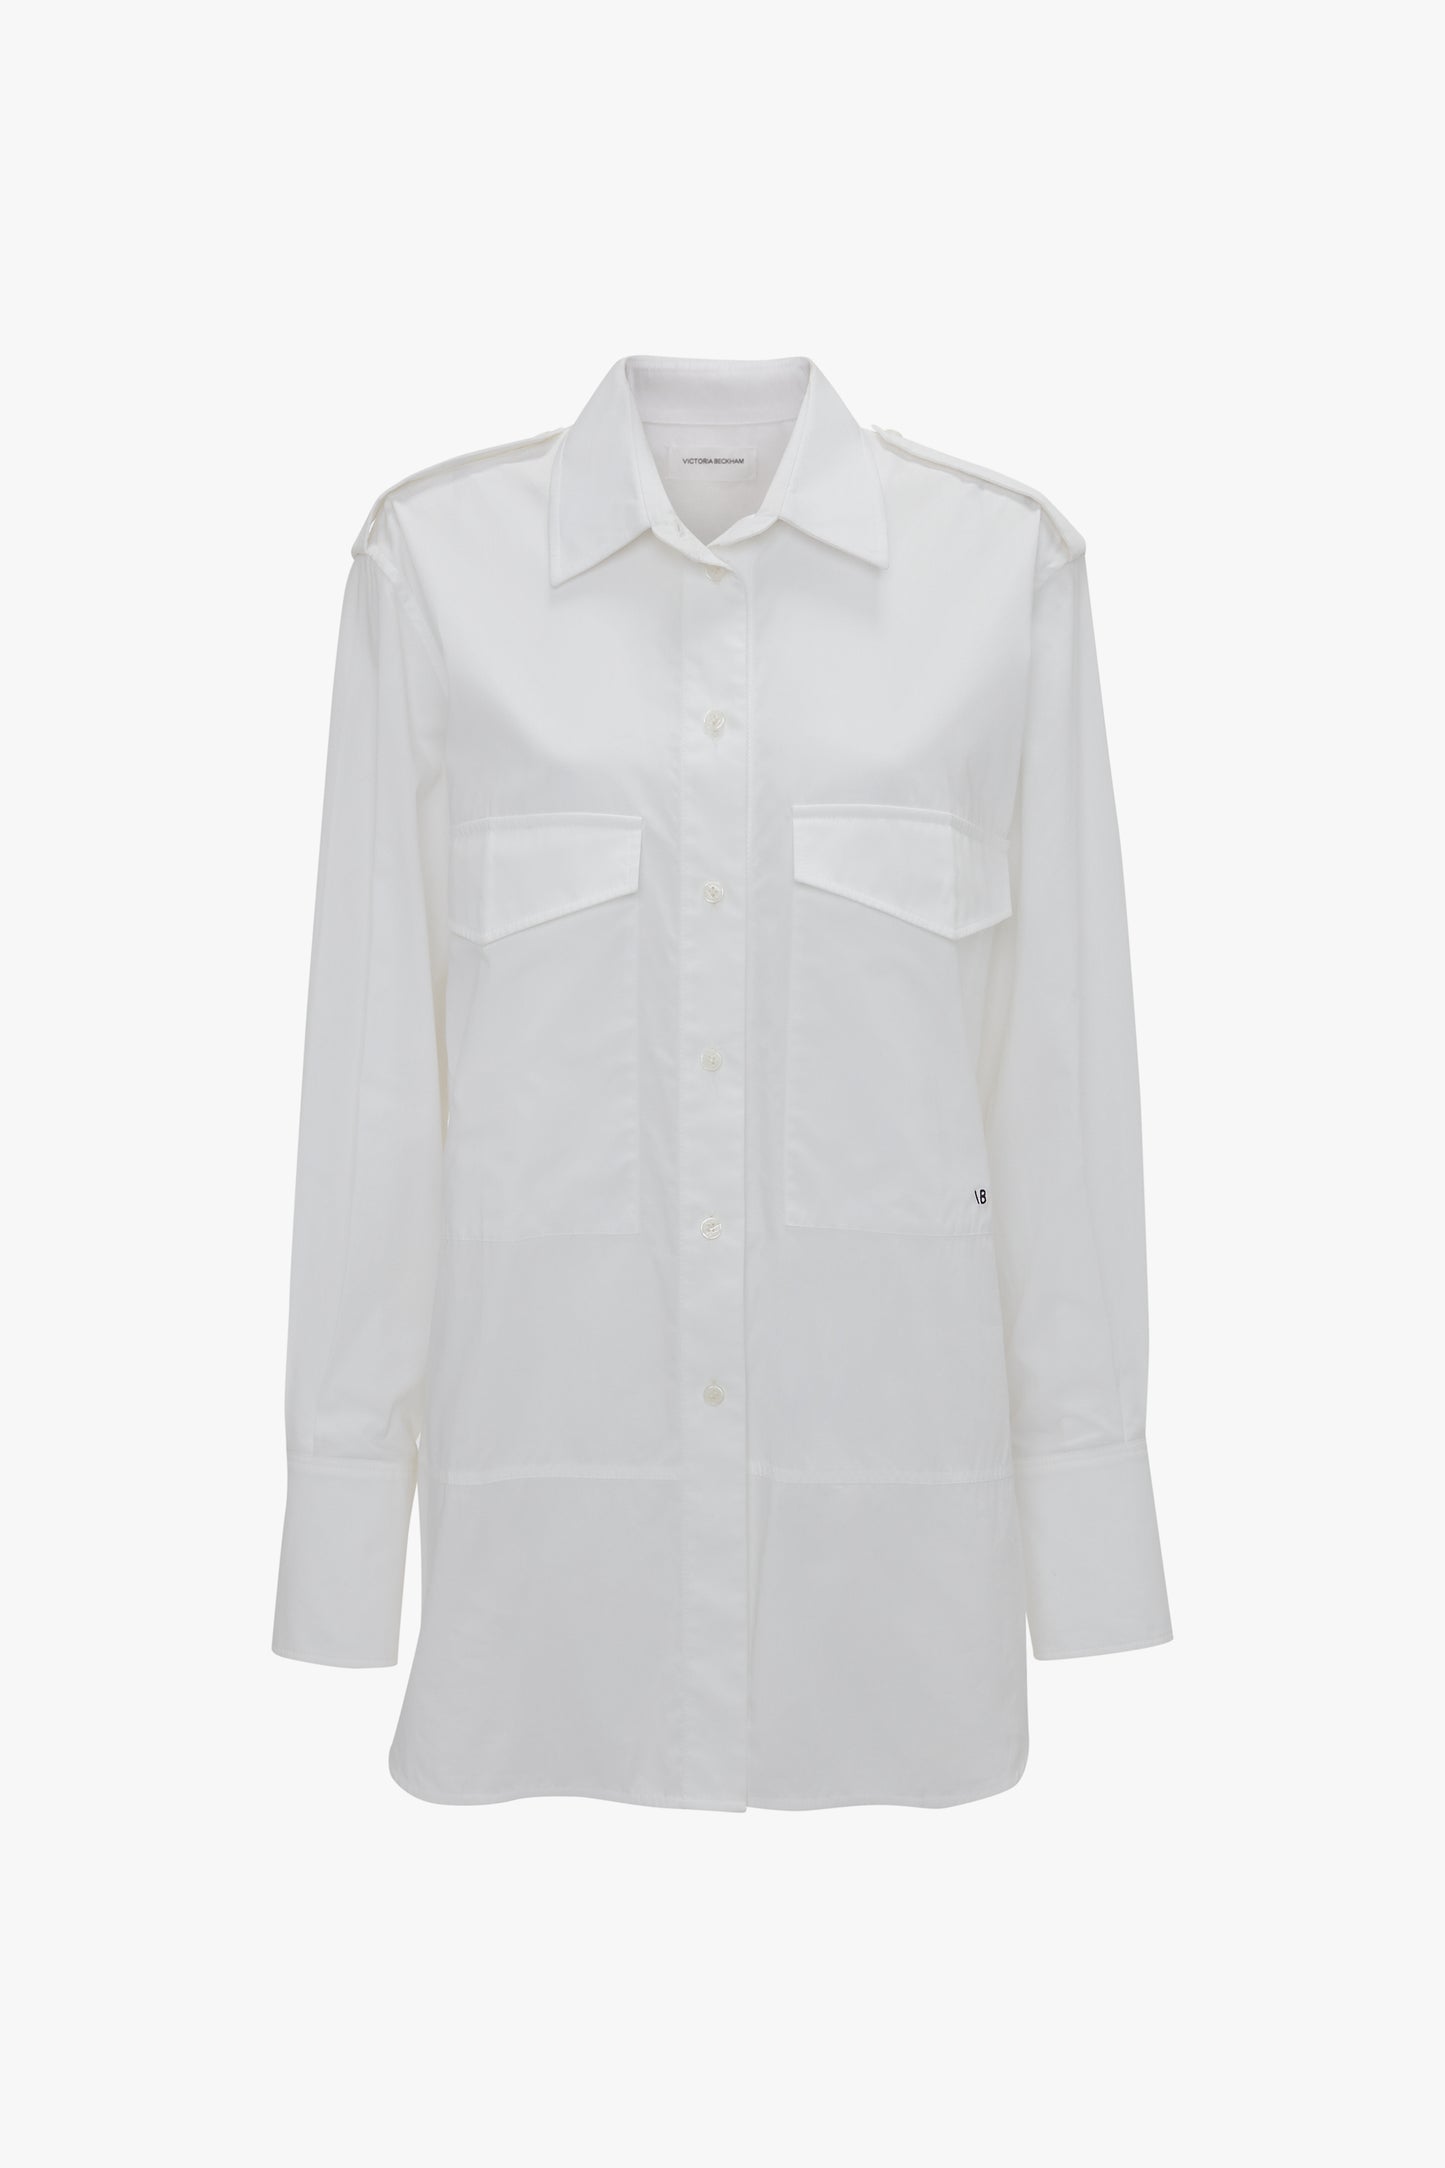 A white, long-sleeve button-down shirt made from organic cotton features two chest pockets and a collar, displayed against a plain white background. The Victoria Beckham Oversized Pocket Shirt In White offers both style and functionality for any wardrobe.